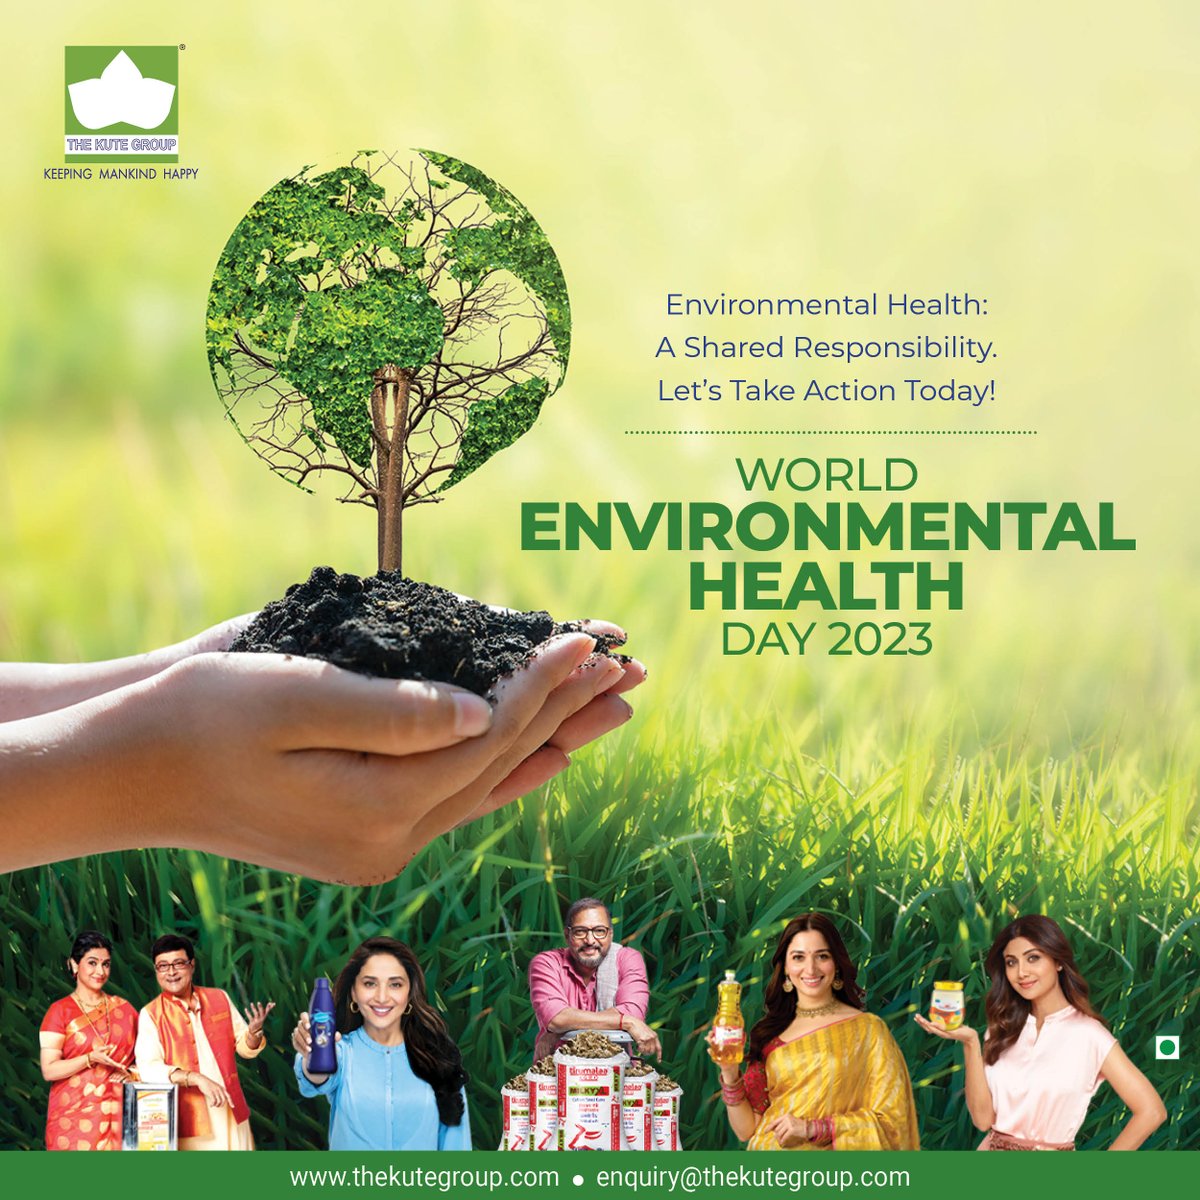 🌍 Happy World Environmental Health Day! Let's unite for a healthier planet and a better tomorrow. 🌱💚

.
.
#EnvironmentalHealthDay #WorldEnvironmentalHealthDay #ProtectOurPlanet #EnvironmentalWellness #HealthForAll #WorldEnvironmentDay #PlanetFirst